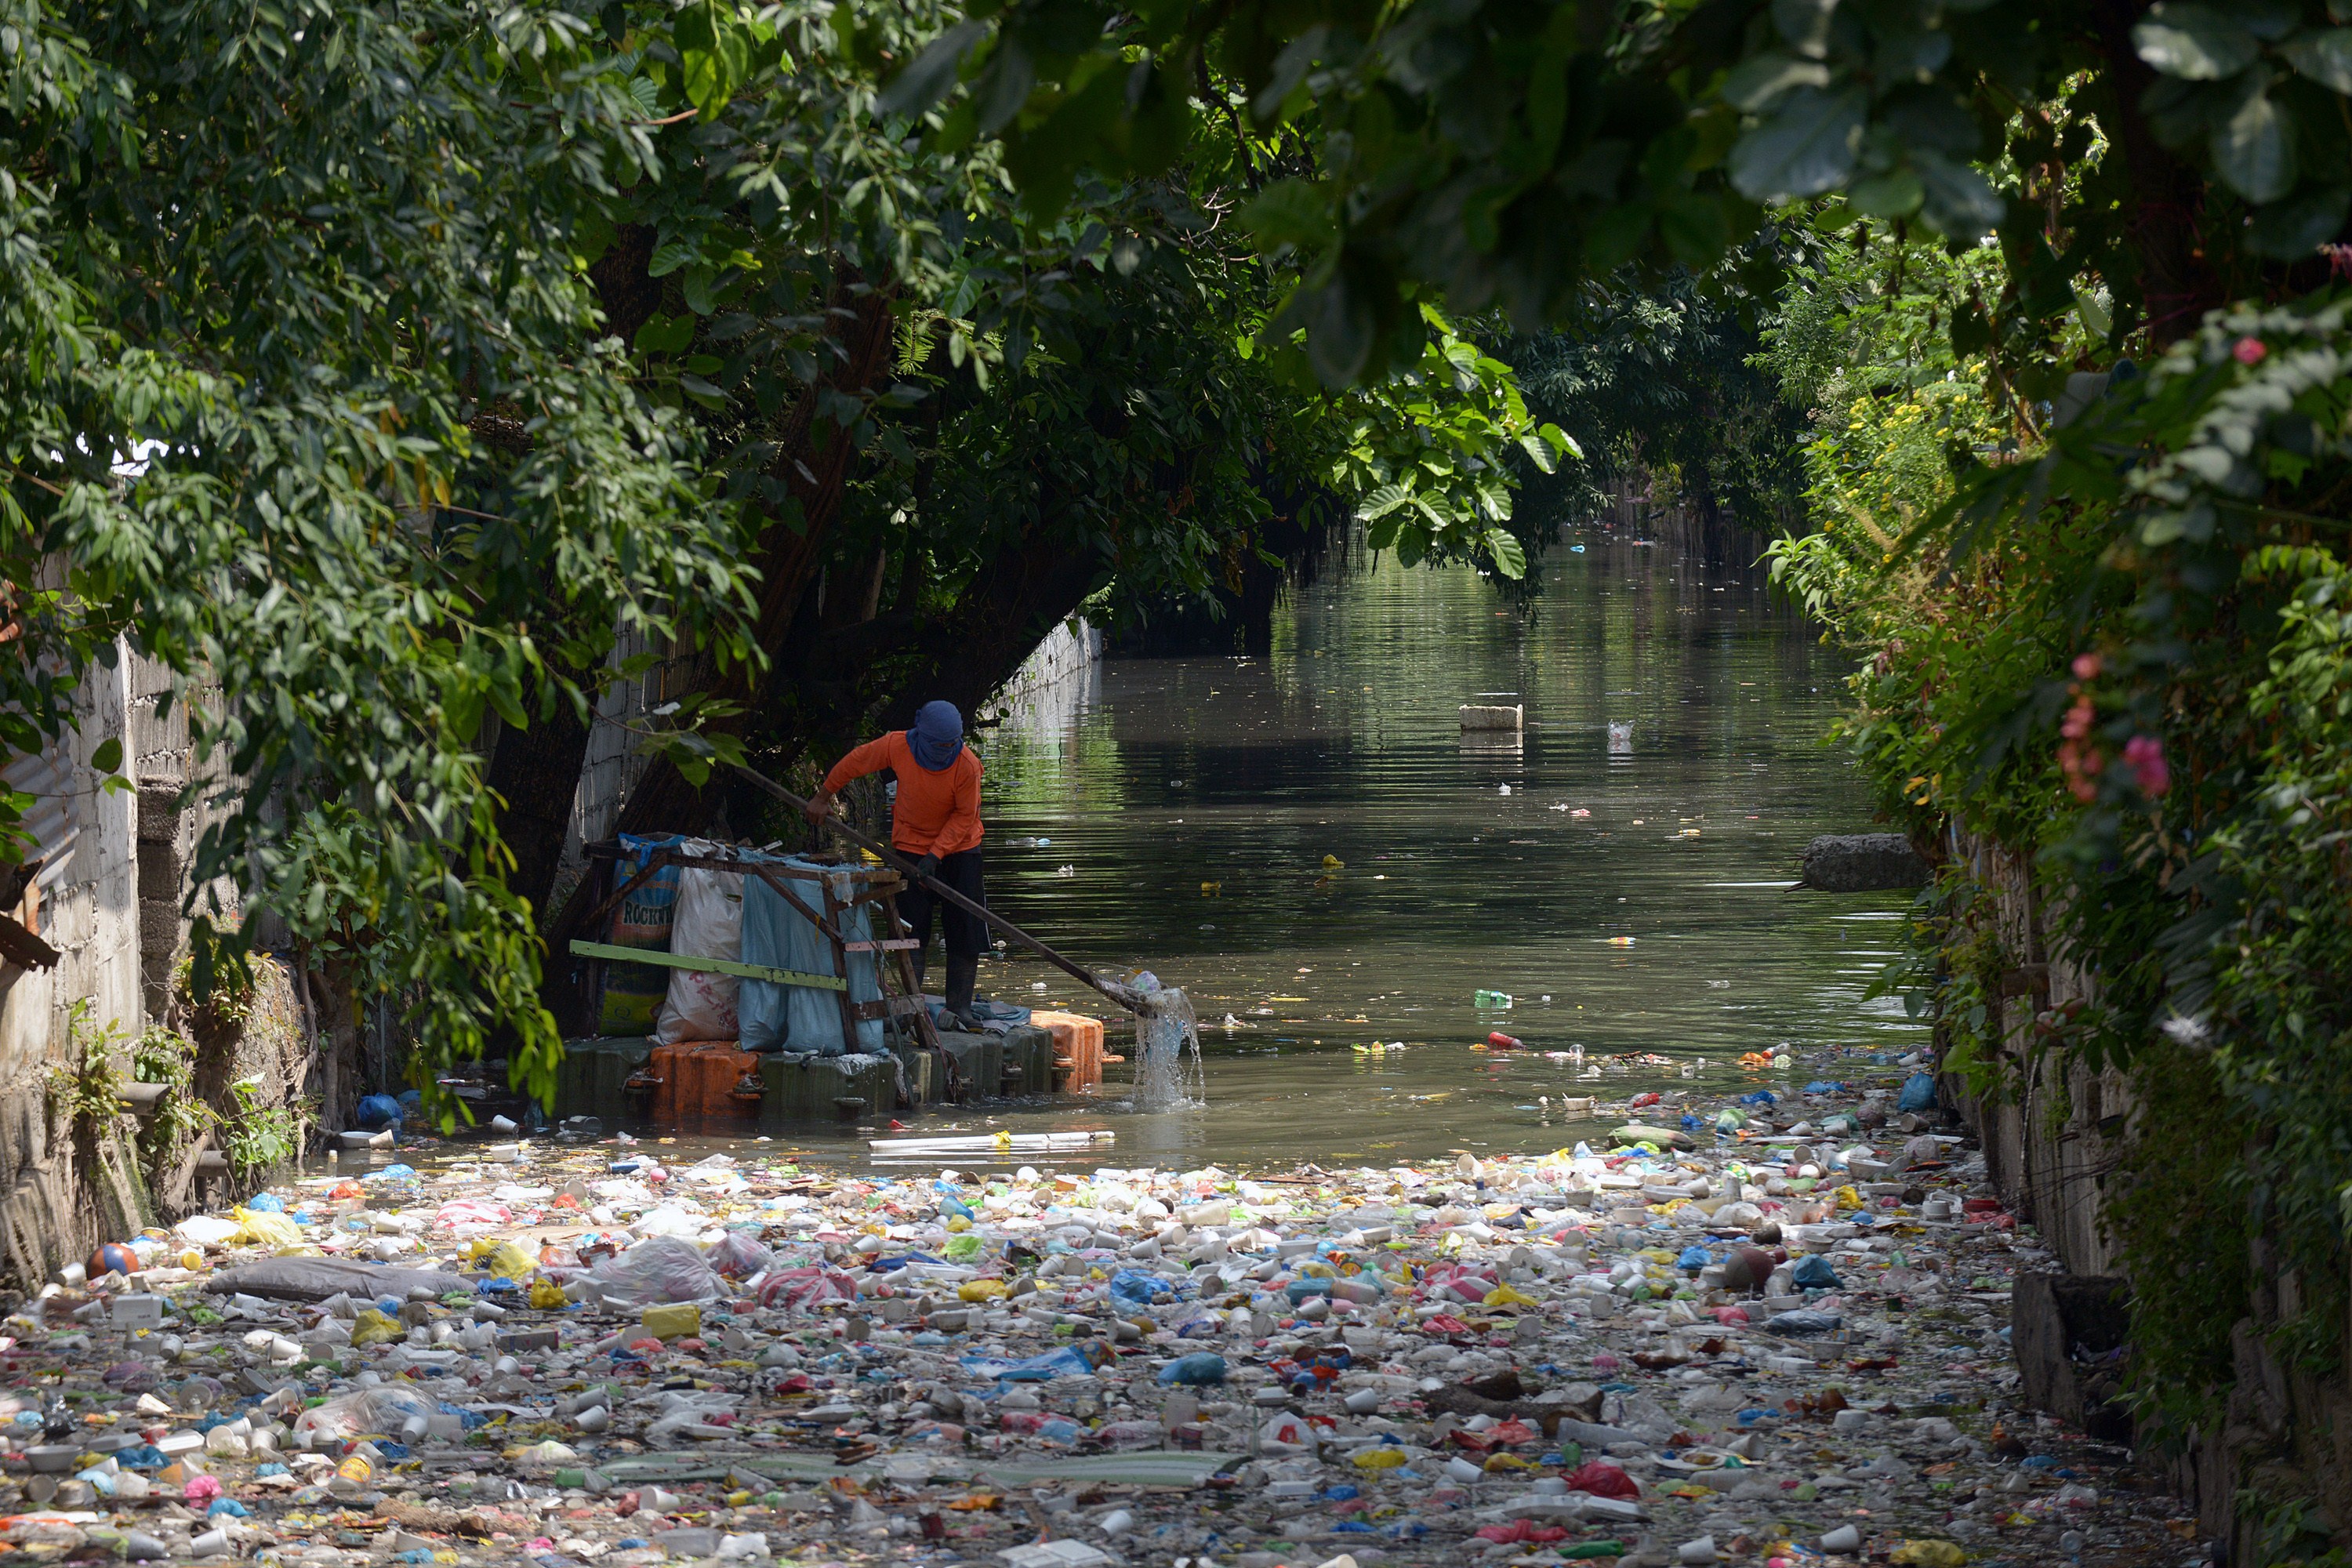 A cleanup volunteer scoops plastic waste at an open sewer in Manila on May 4, 2015. Nongovernmental environmental groups are calling for national legislation to prevent plastic waste that clog waterways (Jay Directo—AFP/Getty Images)